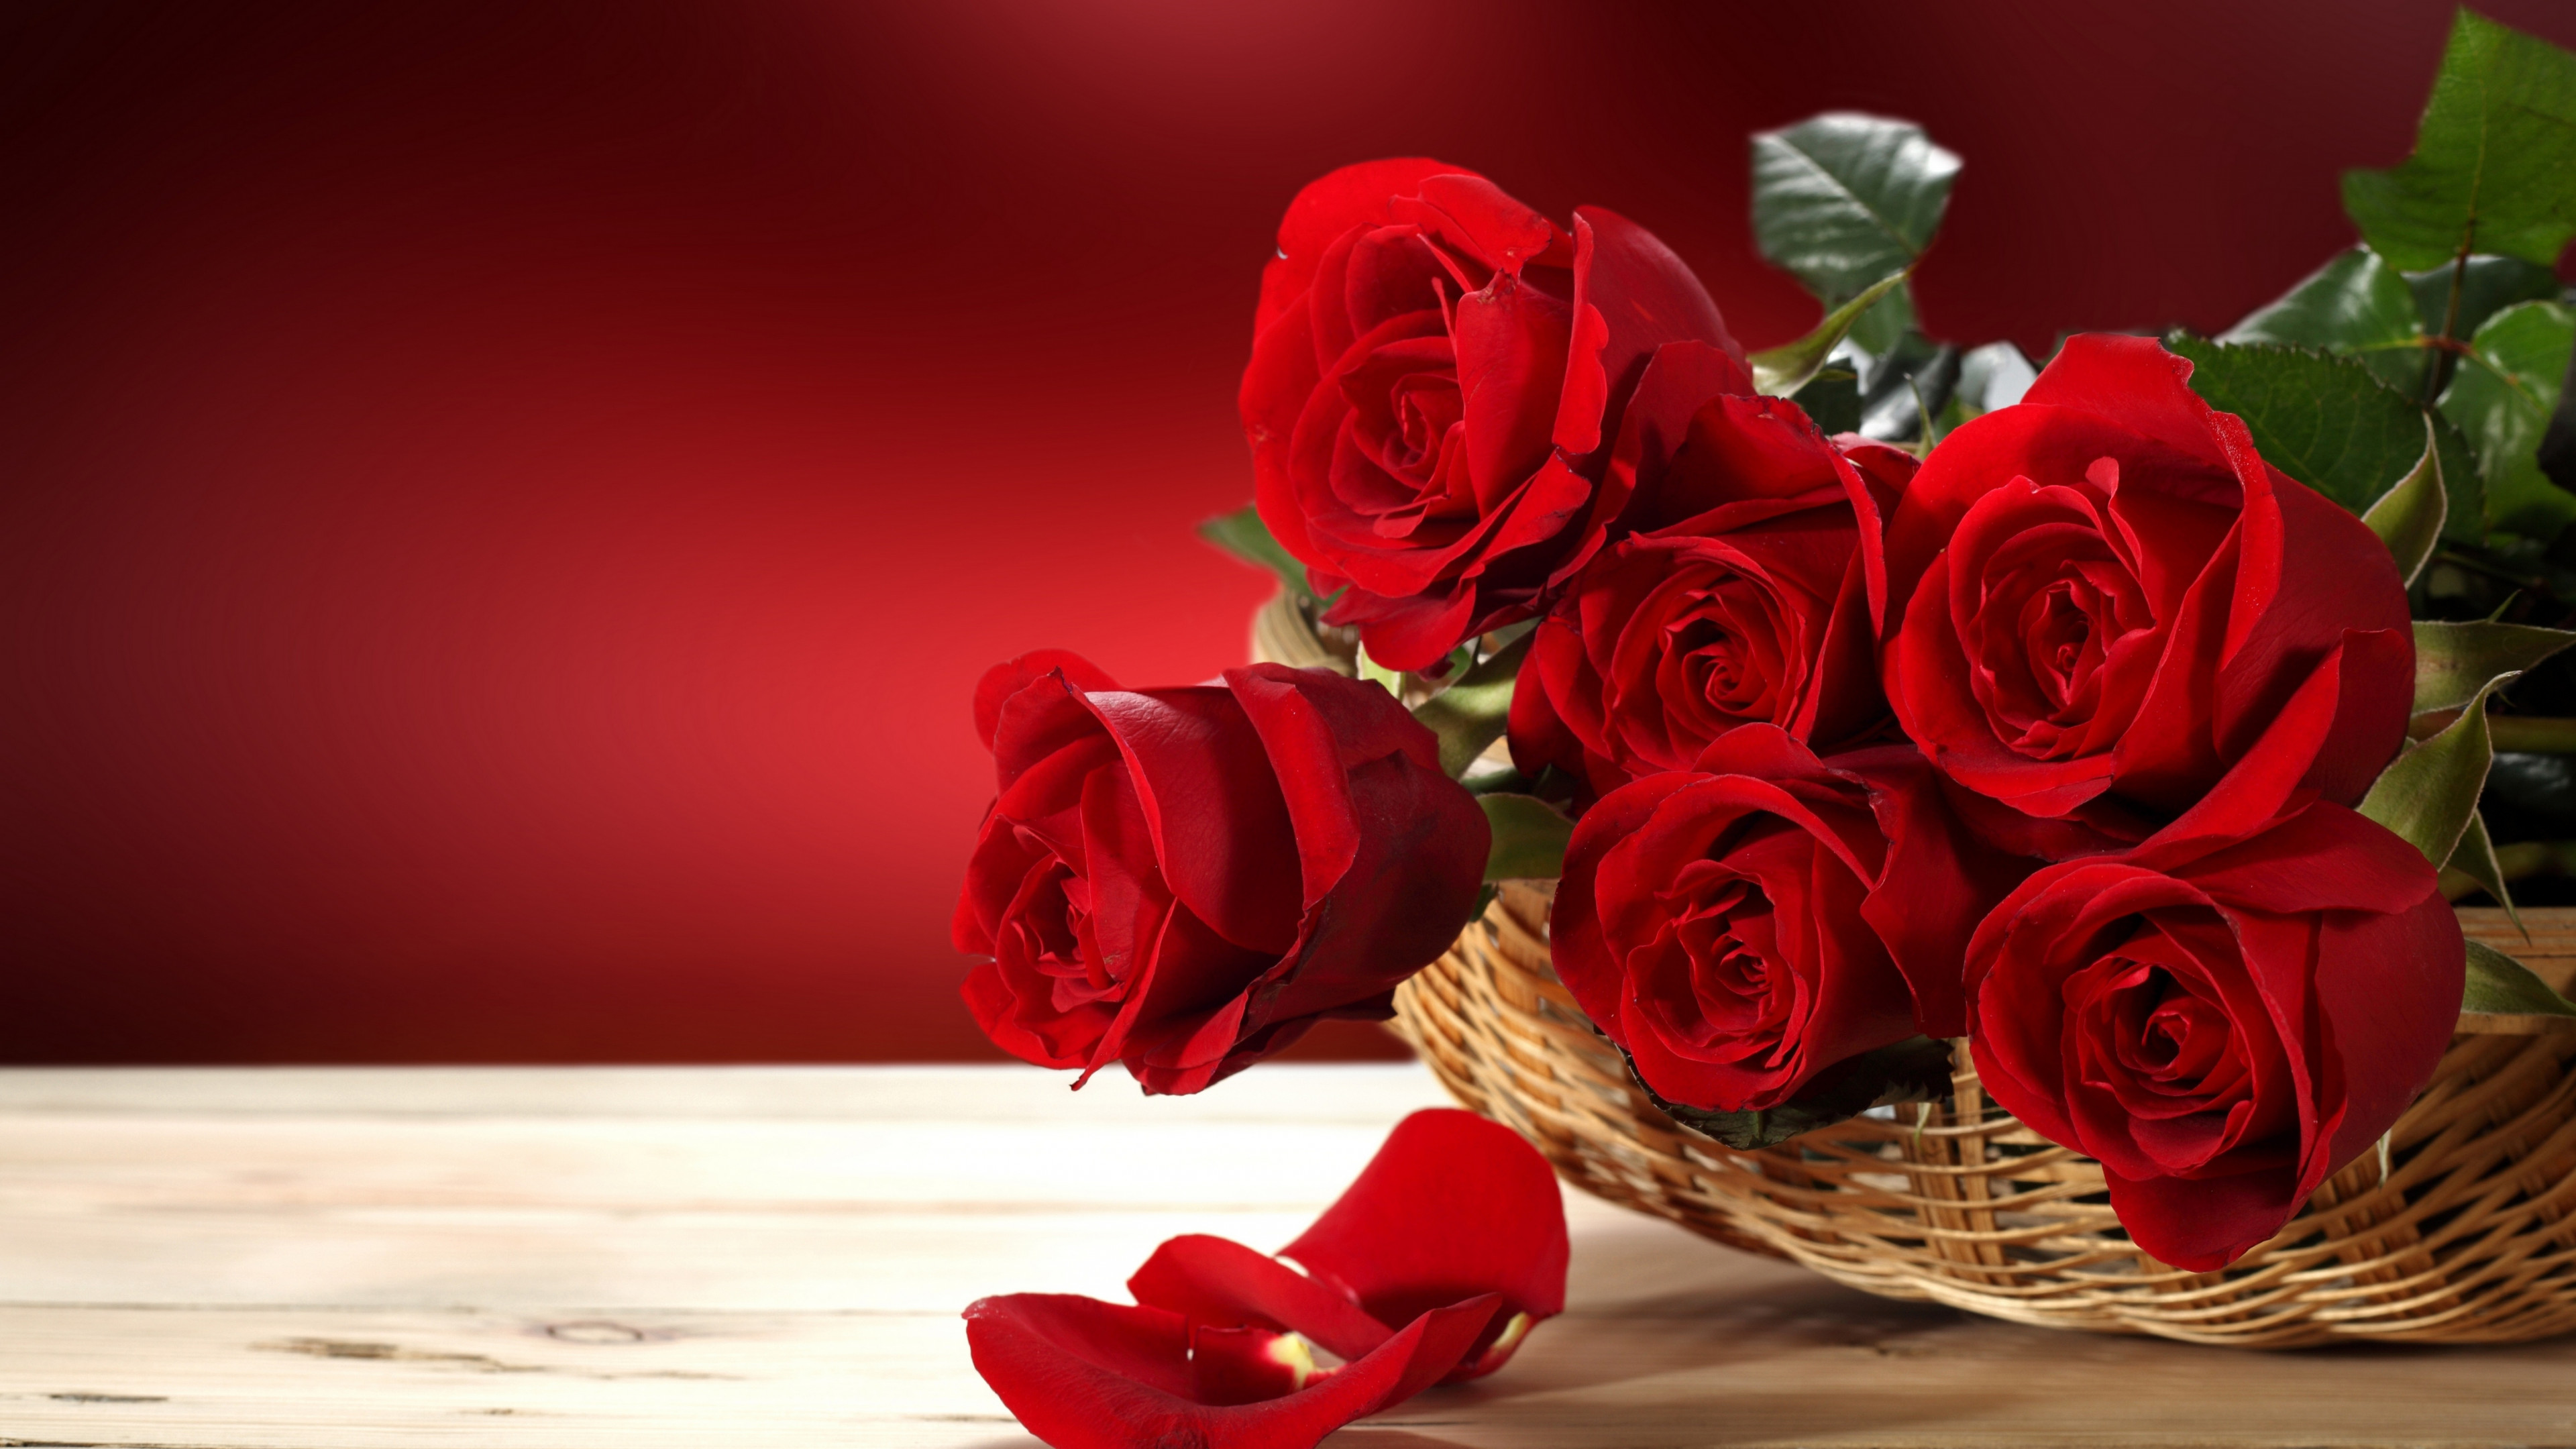 Valentine day free picture download no copyright